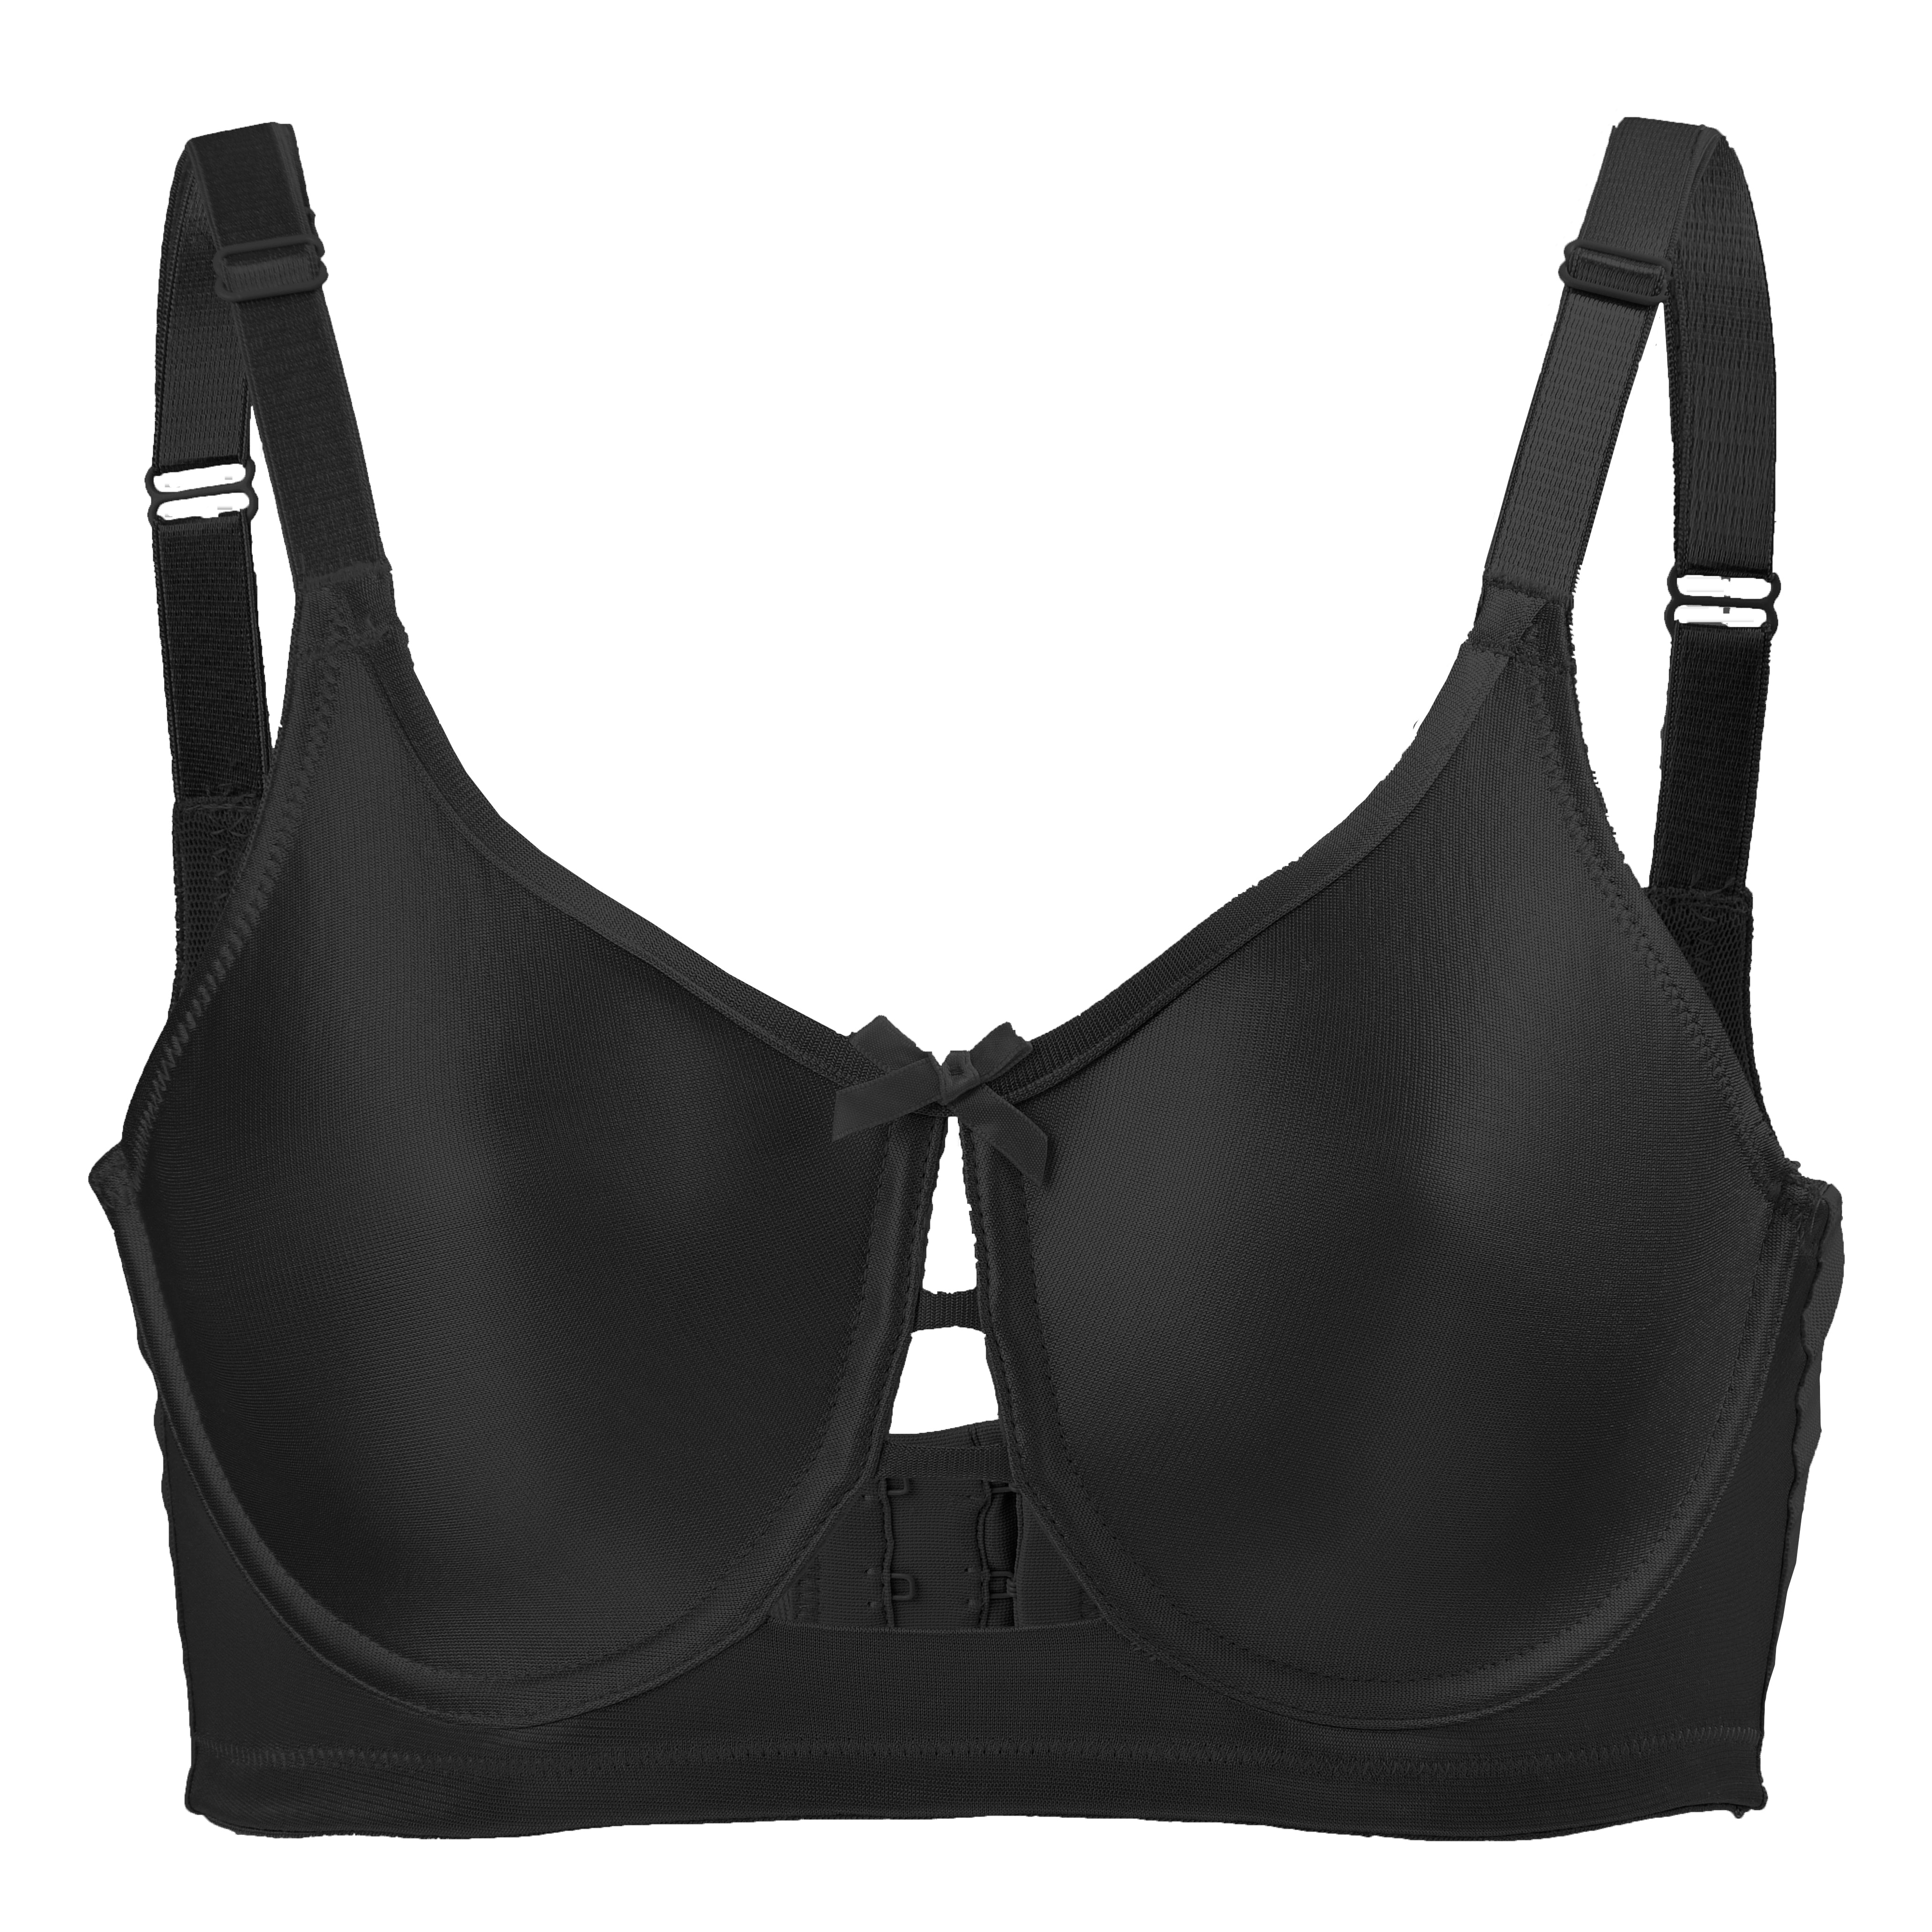 Kaye Larcky Bras: Fit & Coverage for All